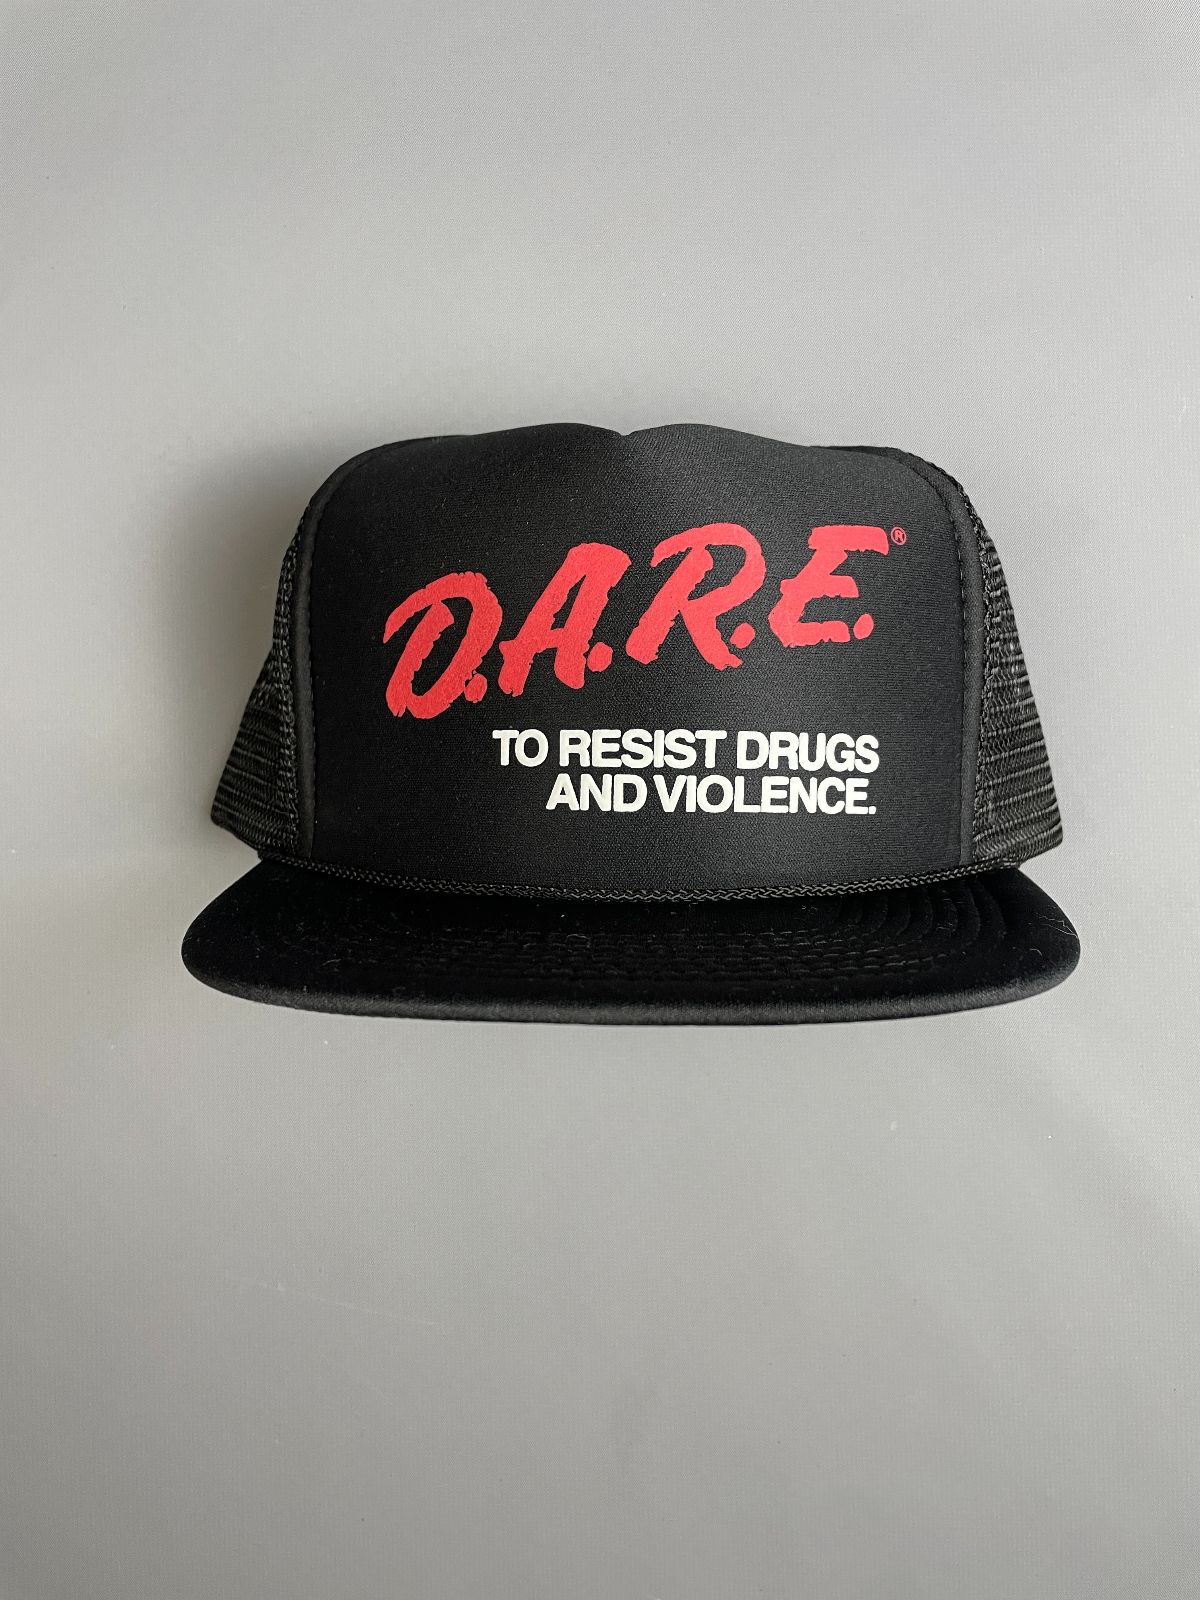 product details: DARE TO RESIST DRUGS AND VIOLENCE LOGO GRAPHIC MESH SNAPBACK TRUCKER HAT photo